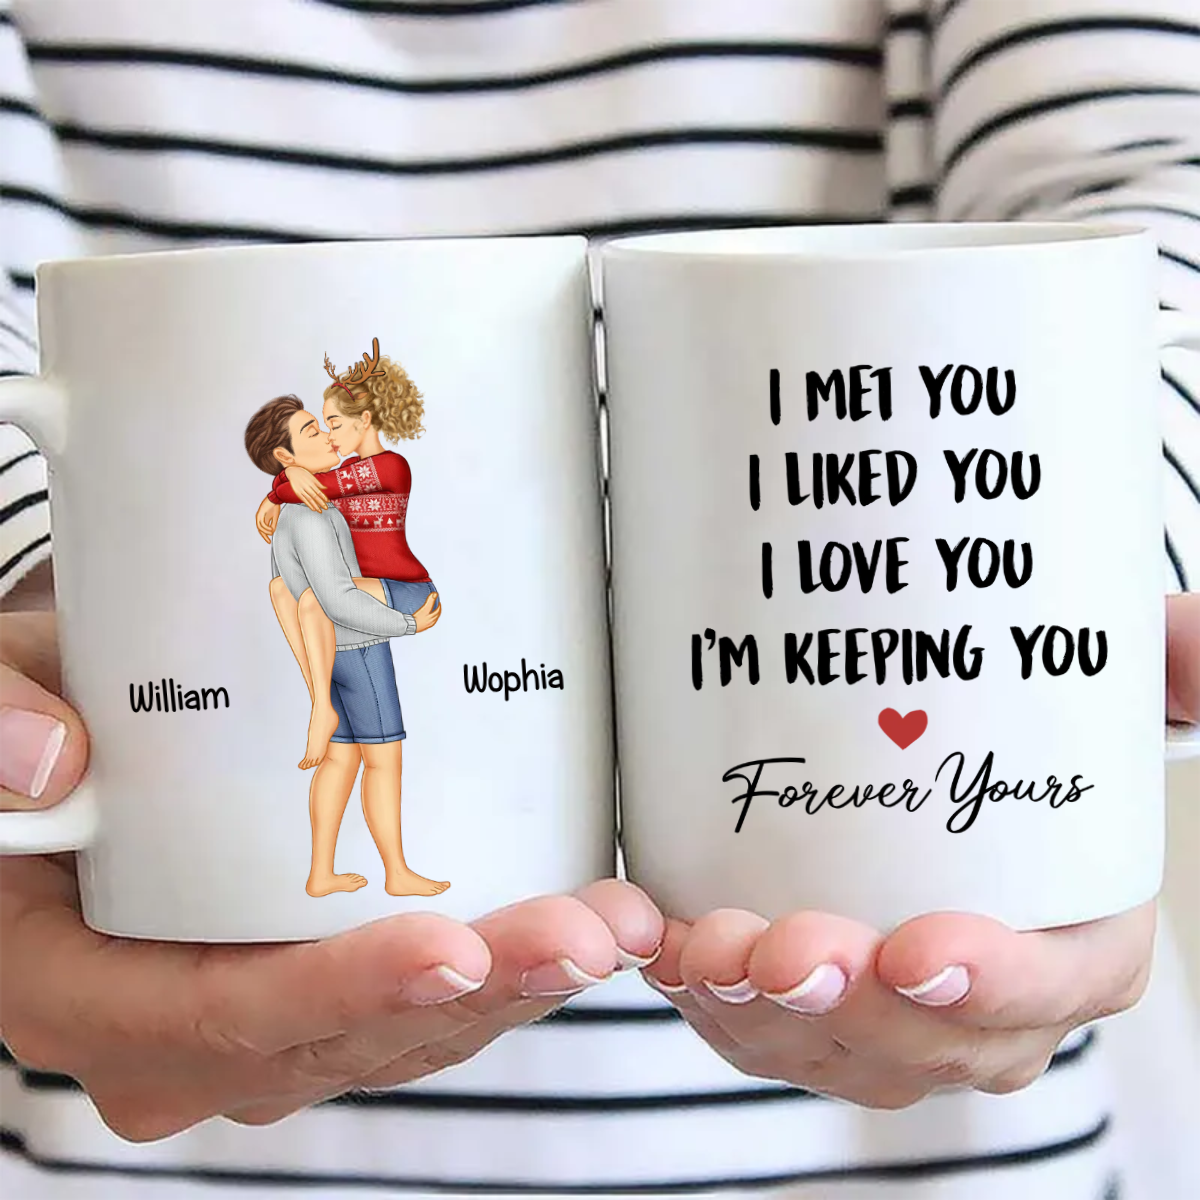 I Met You I Liked You I Love You Keeping You - Birthday, Loving, Anniversary Gift For Spouse, Husband, Wife, Couple - Personalized Mug